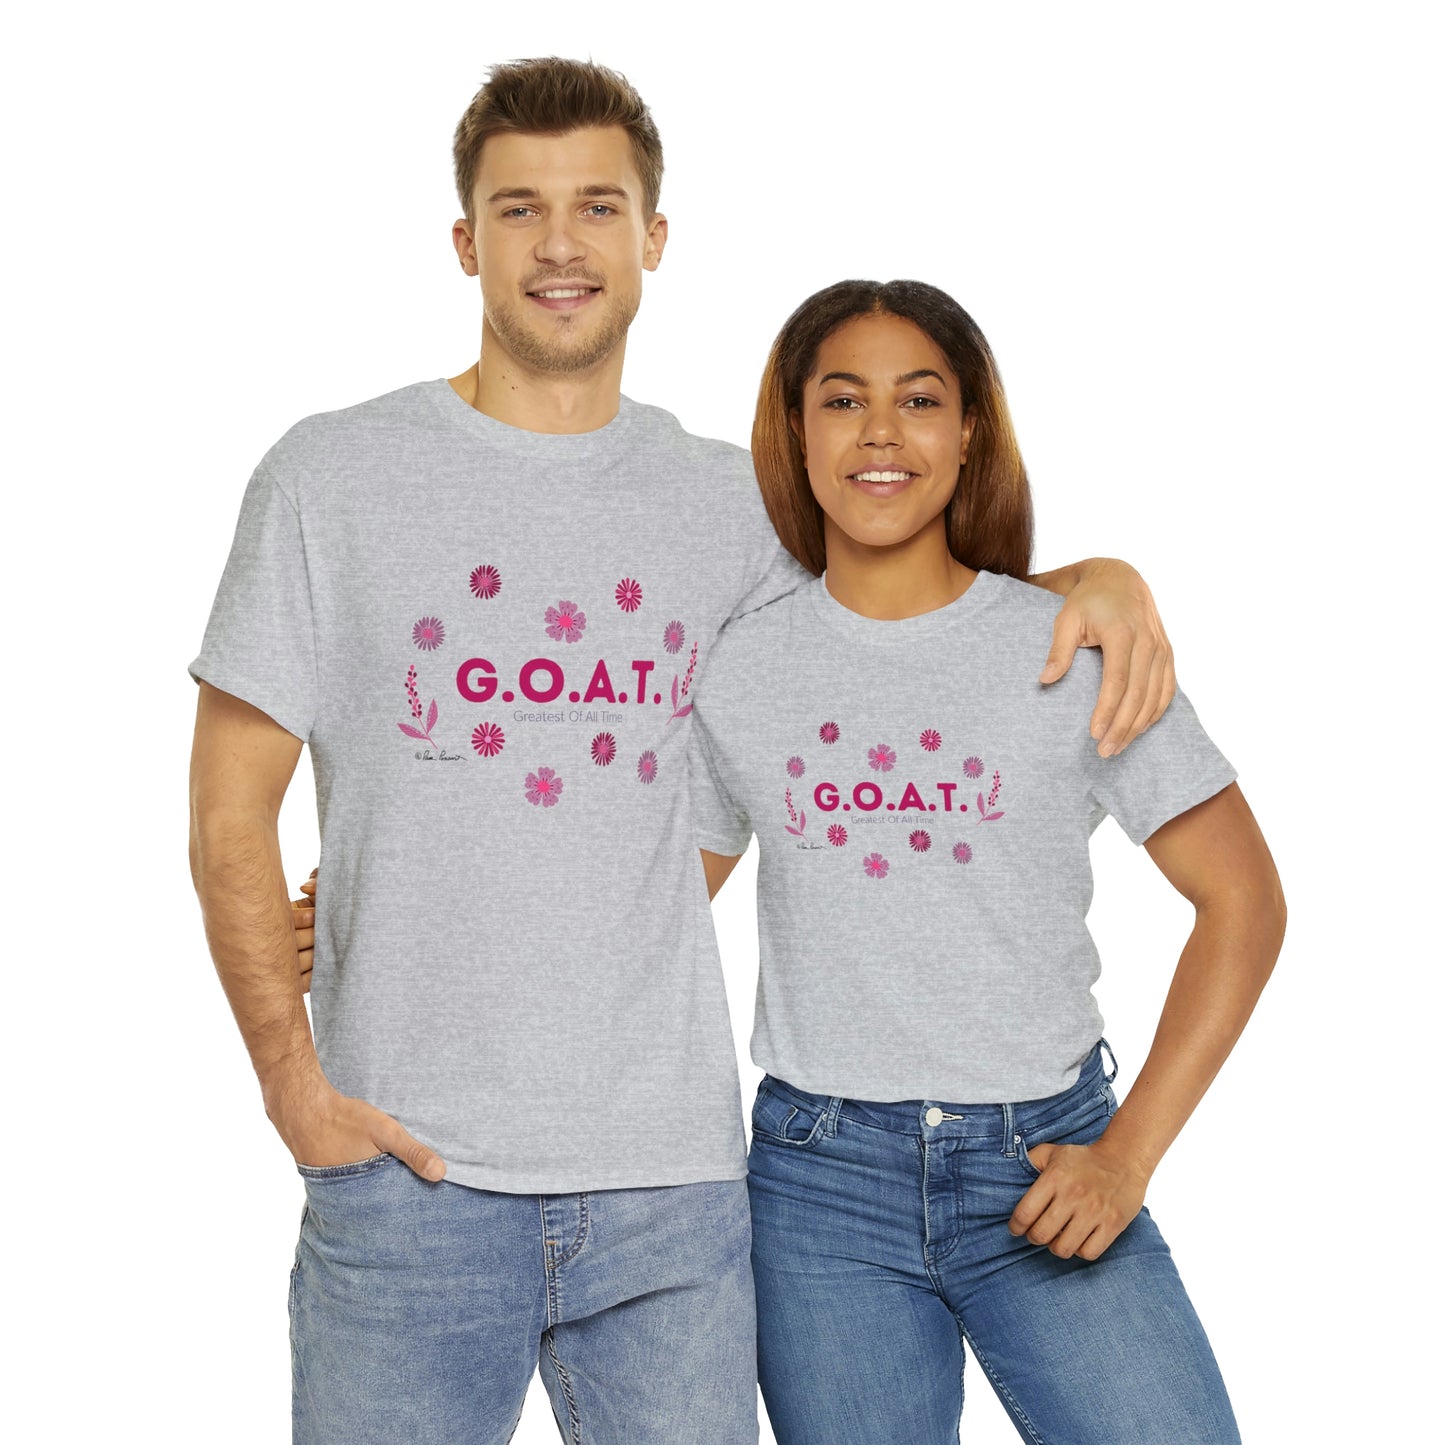 Mock up of a man and a woman wearing matching grey t-shirts